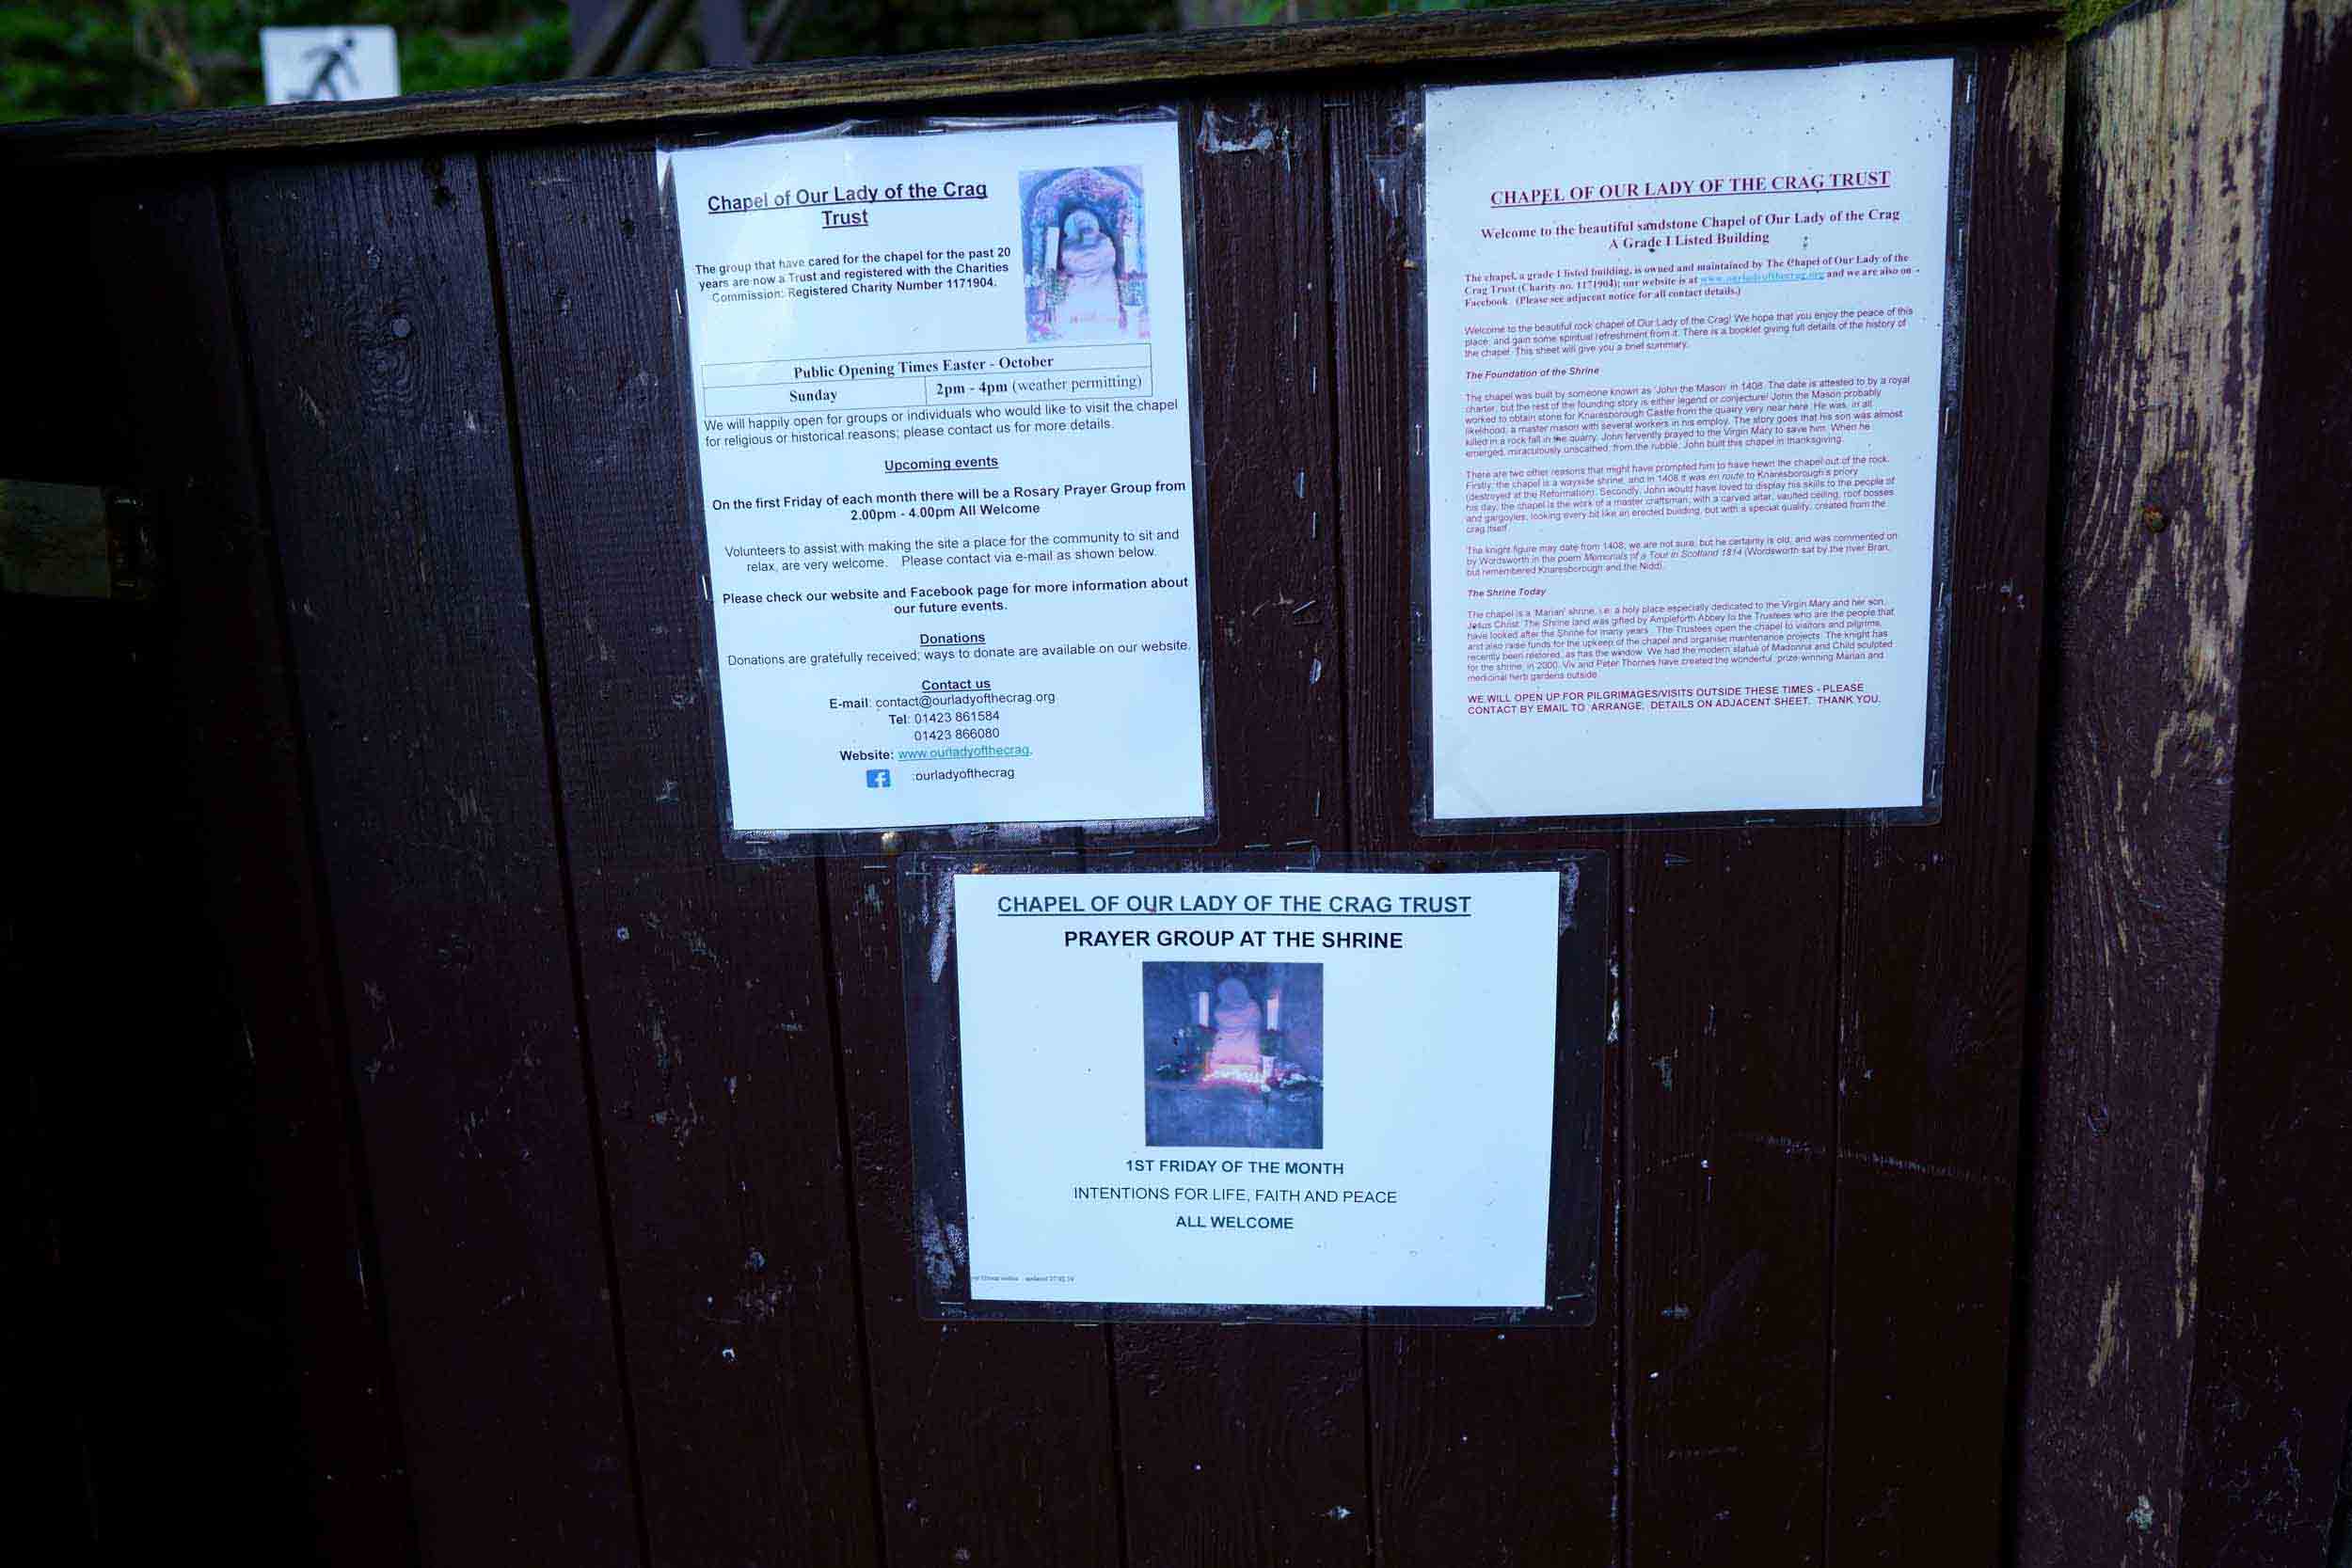 Notices on the gate show what's on